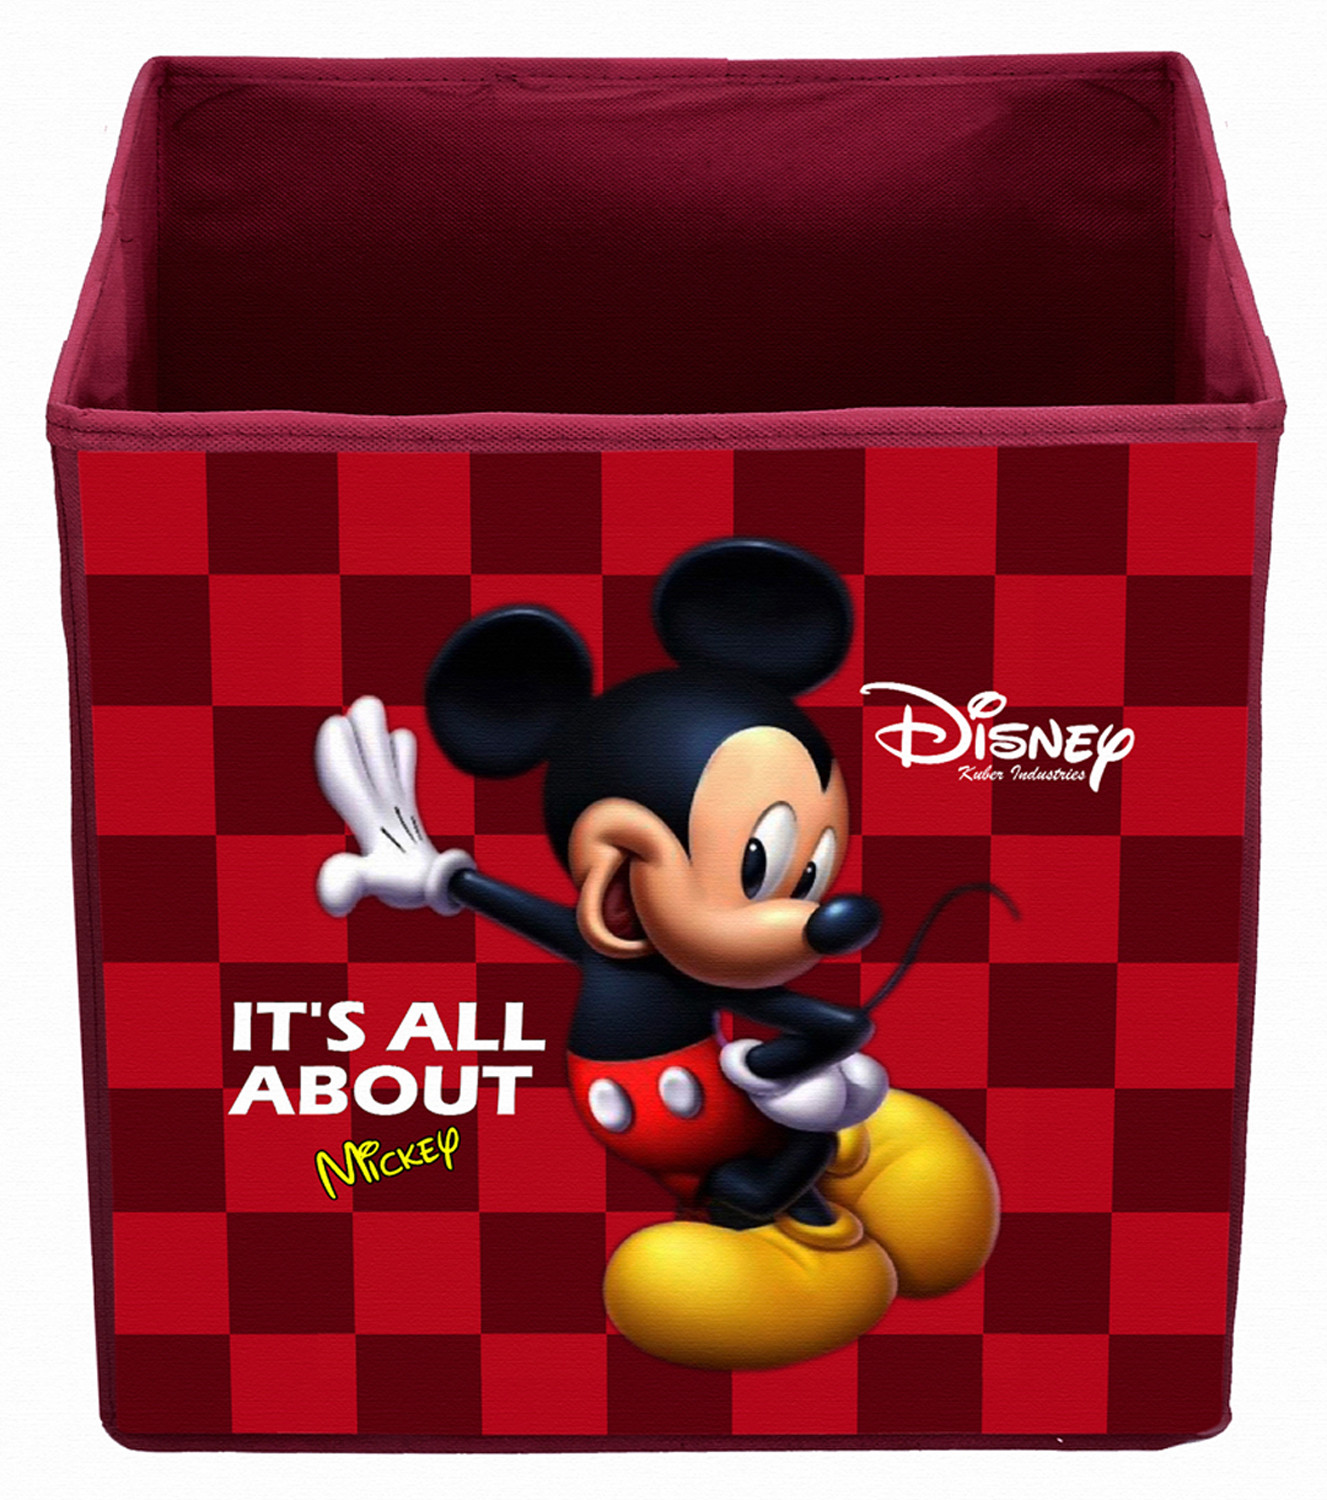 Kuber Industries Disney Print Non Woven Fabric Foldable Large Size Storage Cube Toy,Books,Shoes Storage Box With Handle (Black,Red & Maroon)